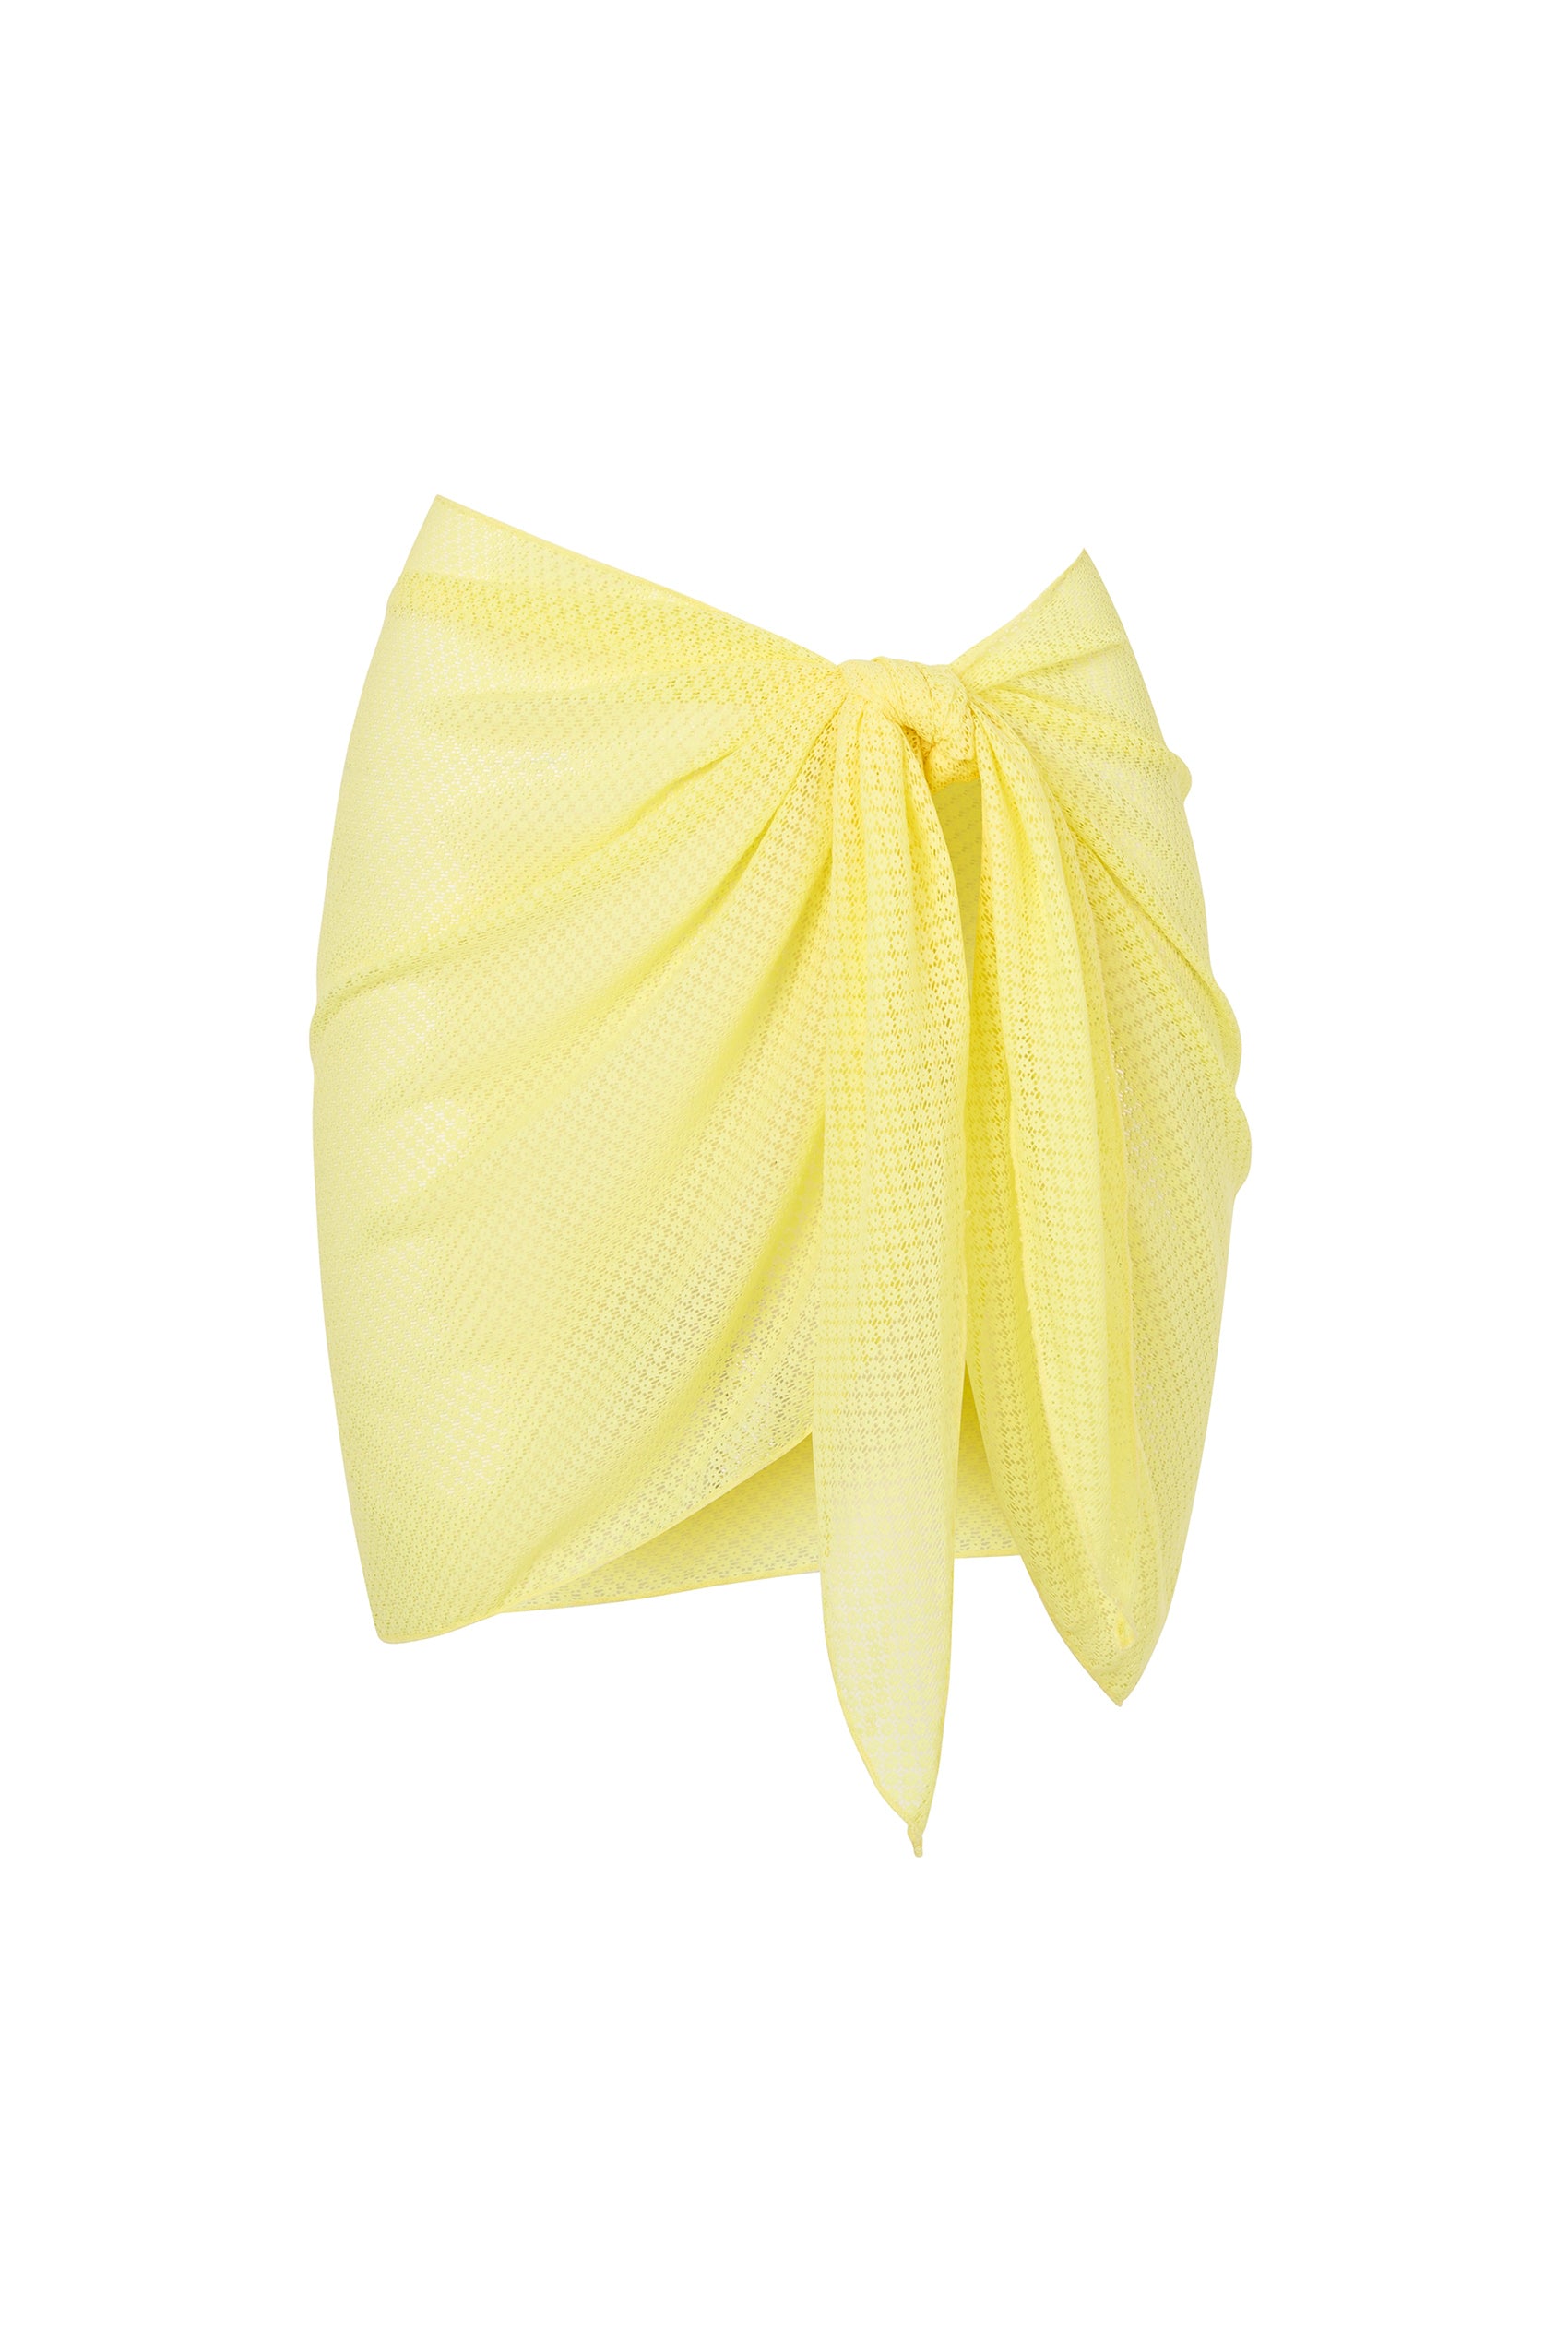 Sarong in Limon